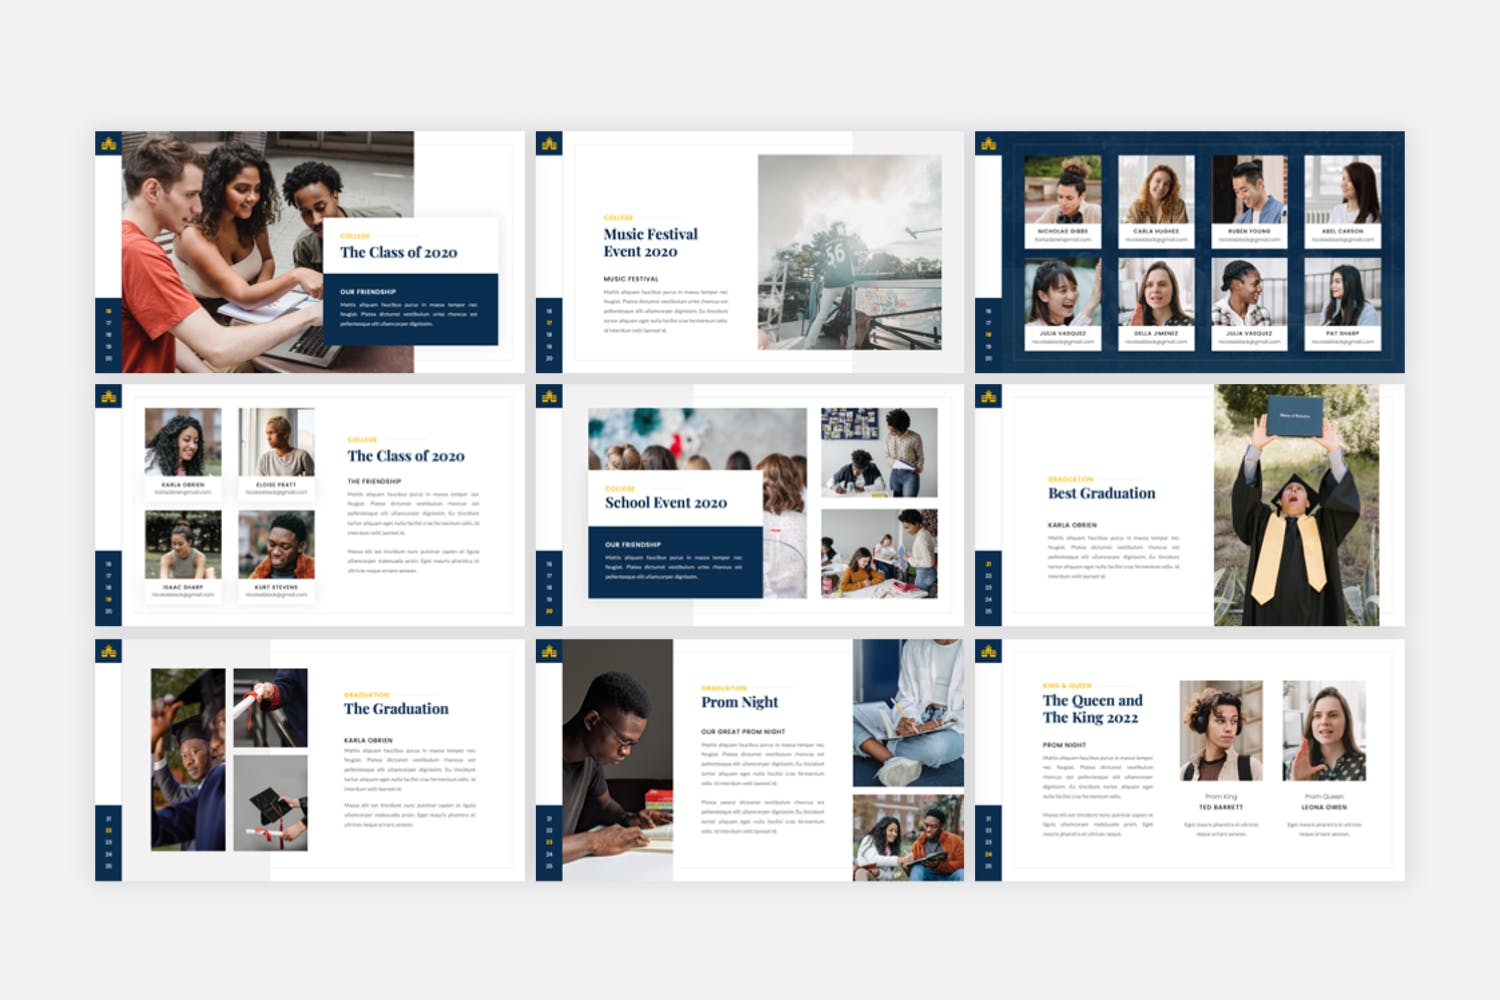 The main advantage of this template is flexible design.